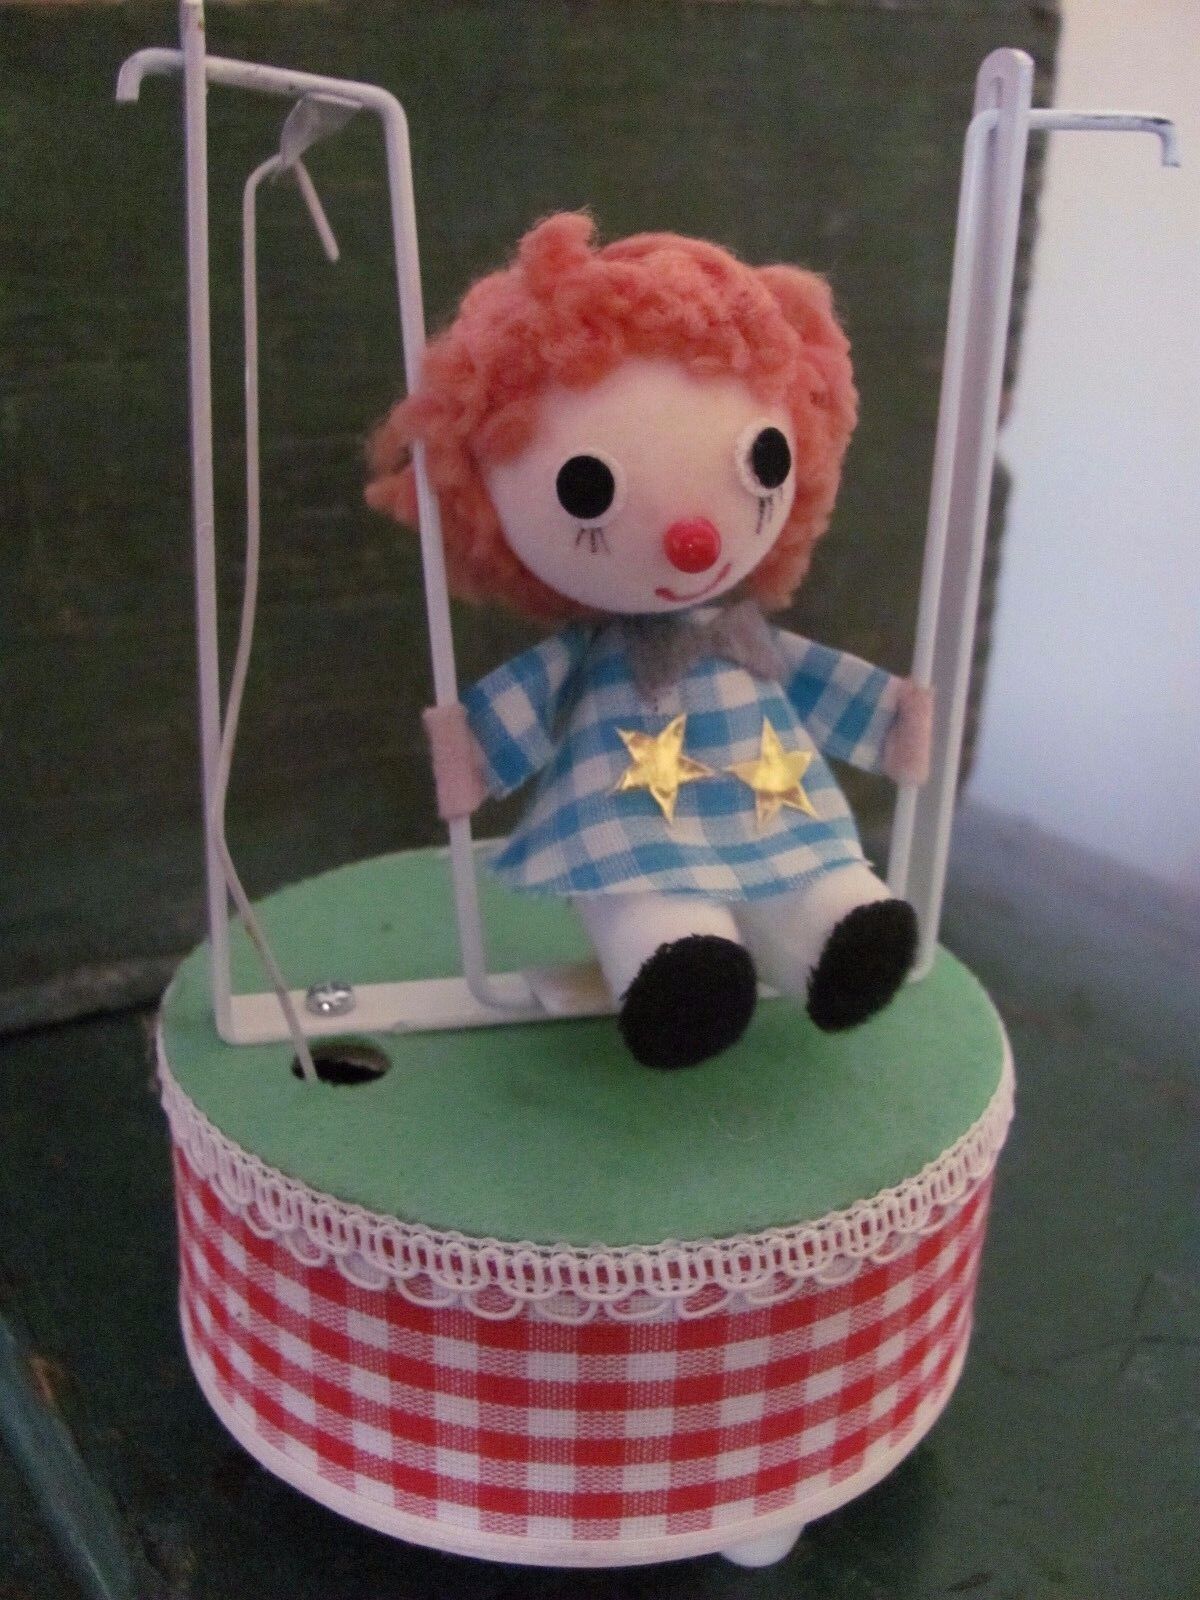 Vintage Music Box, Girl on a Swing, Plays Edelweiss, Made in Japan